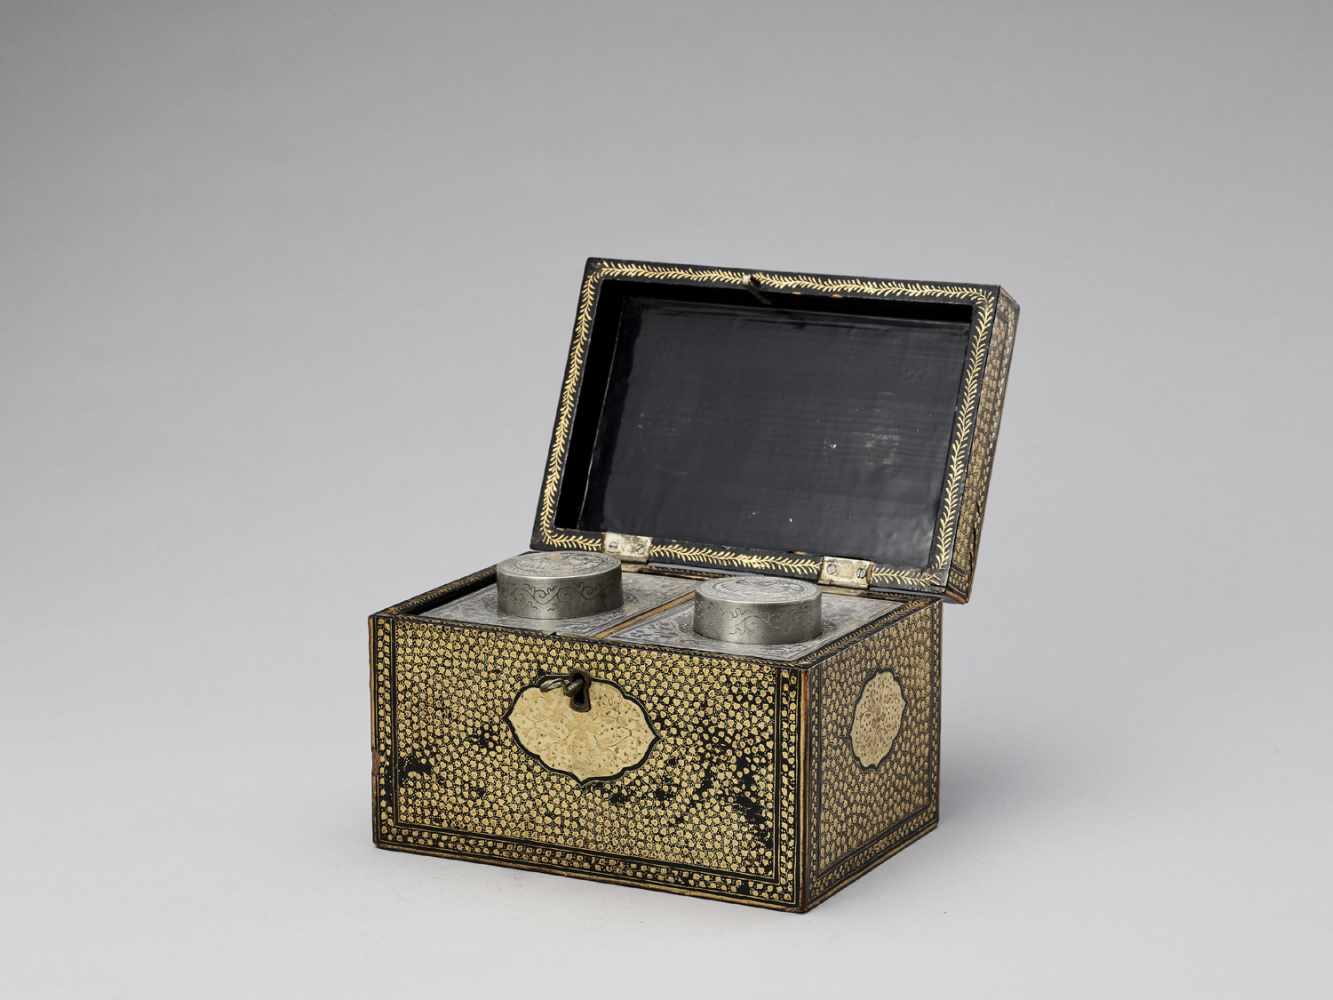 A CANTON LACQUER TEA CADDY WITH ORIGINAL TEA CONTAINERS, QING